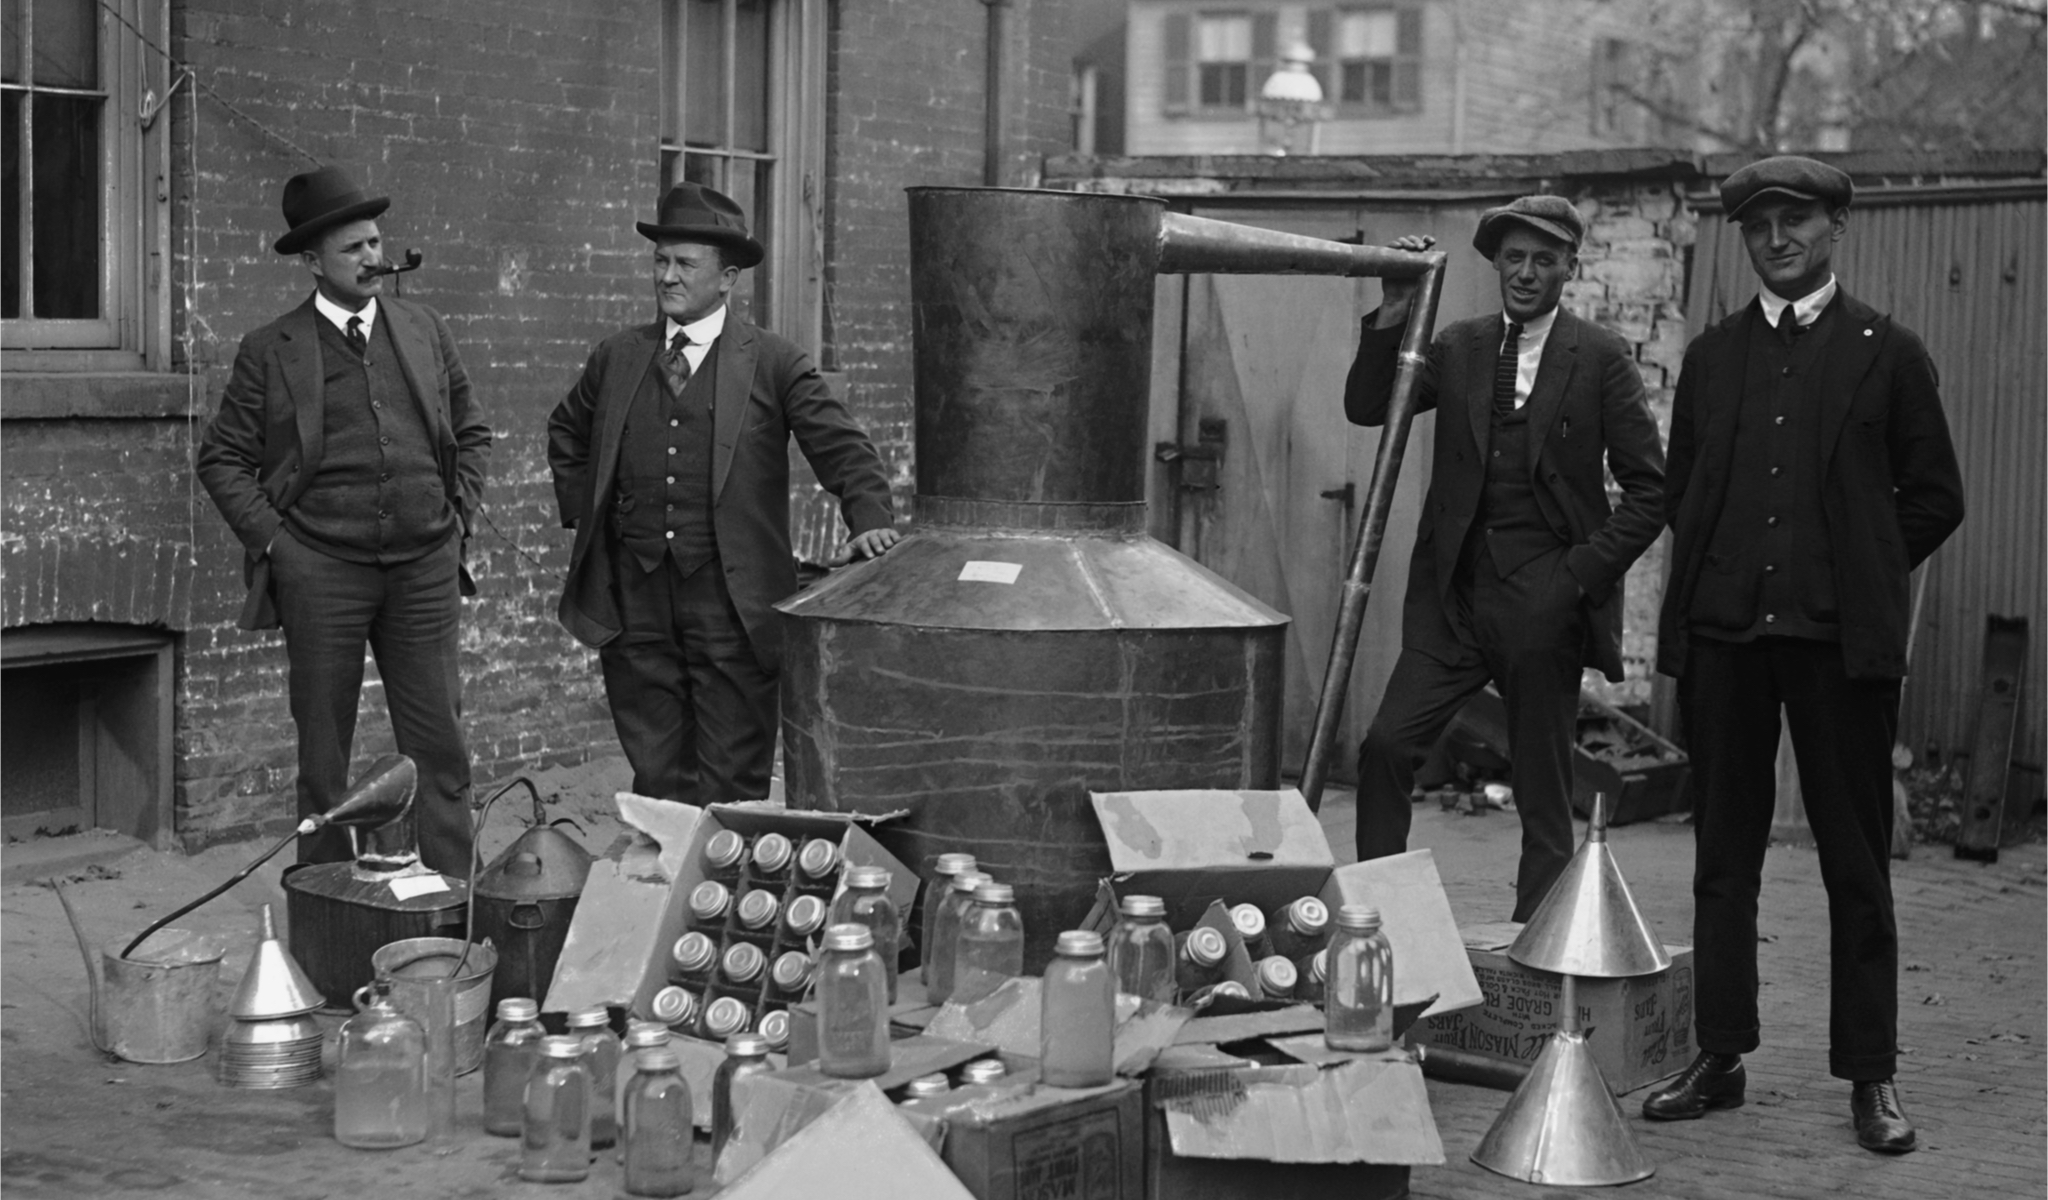 Most people today regard America’s experiment with alcohol prohibition as a national embarrassment, rightly repealed in 1933. So it will be with the